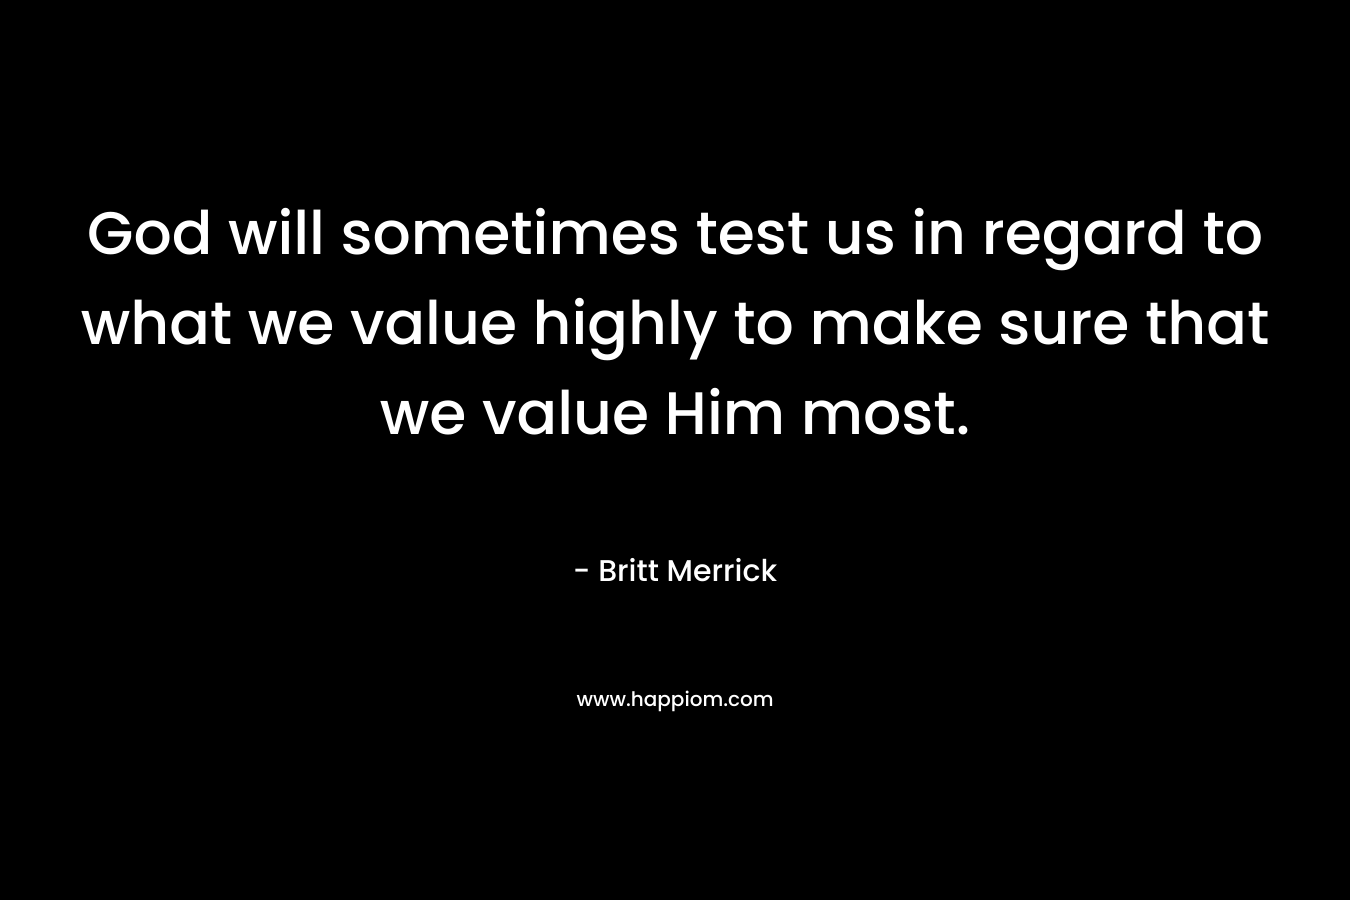 God will sometimes test us in regard to what we value highly to make sure that we value Him most.